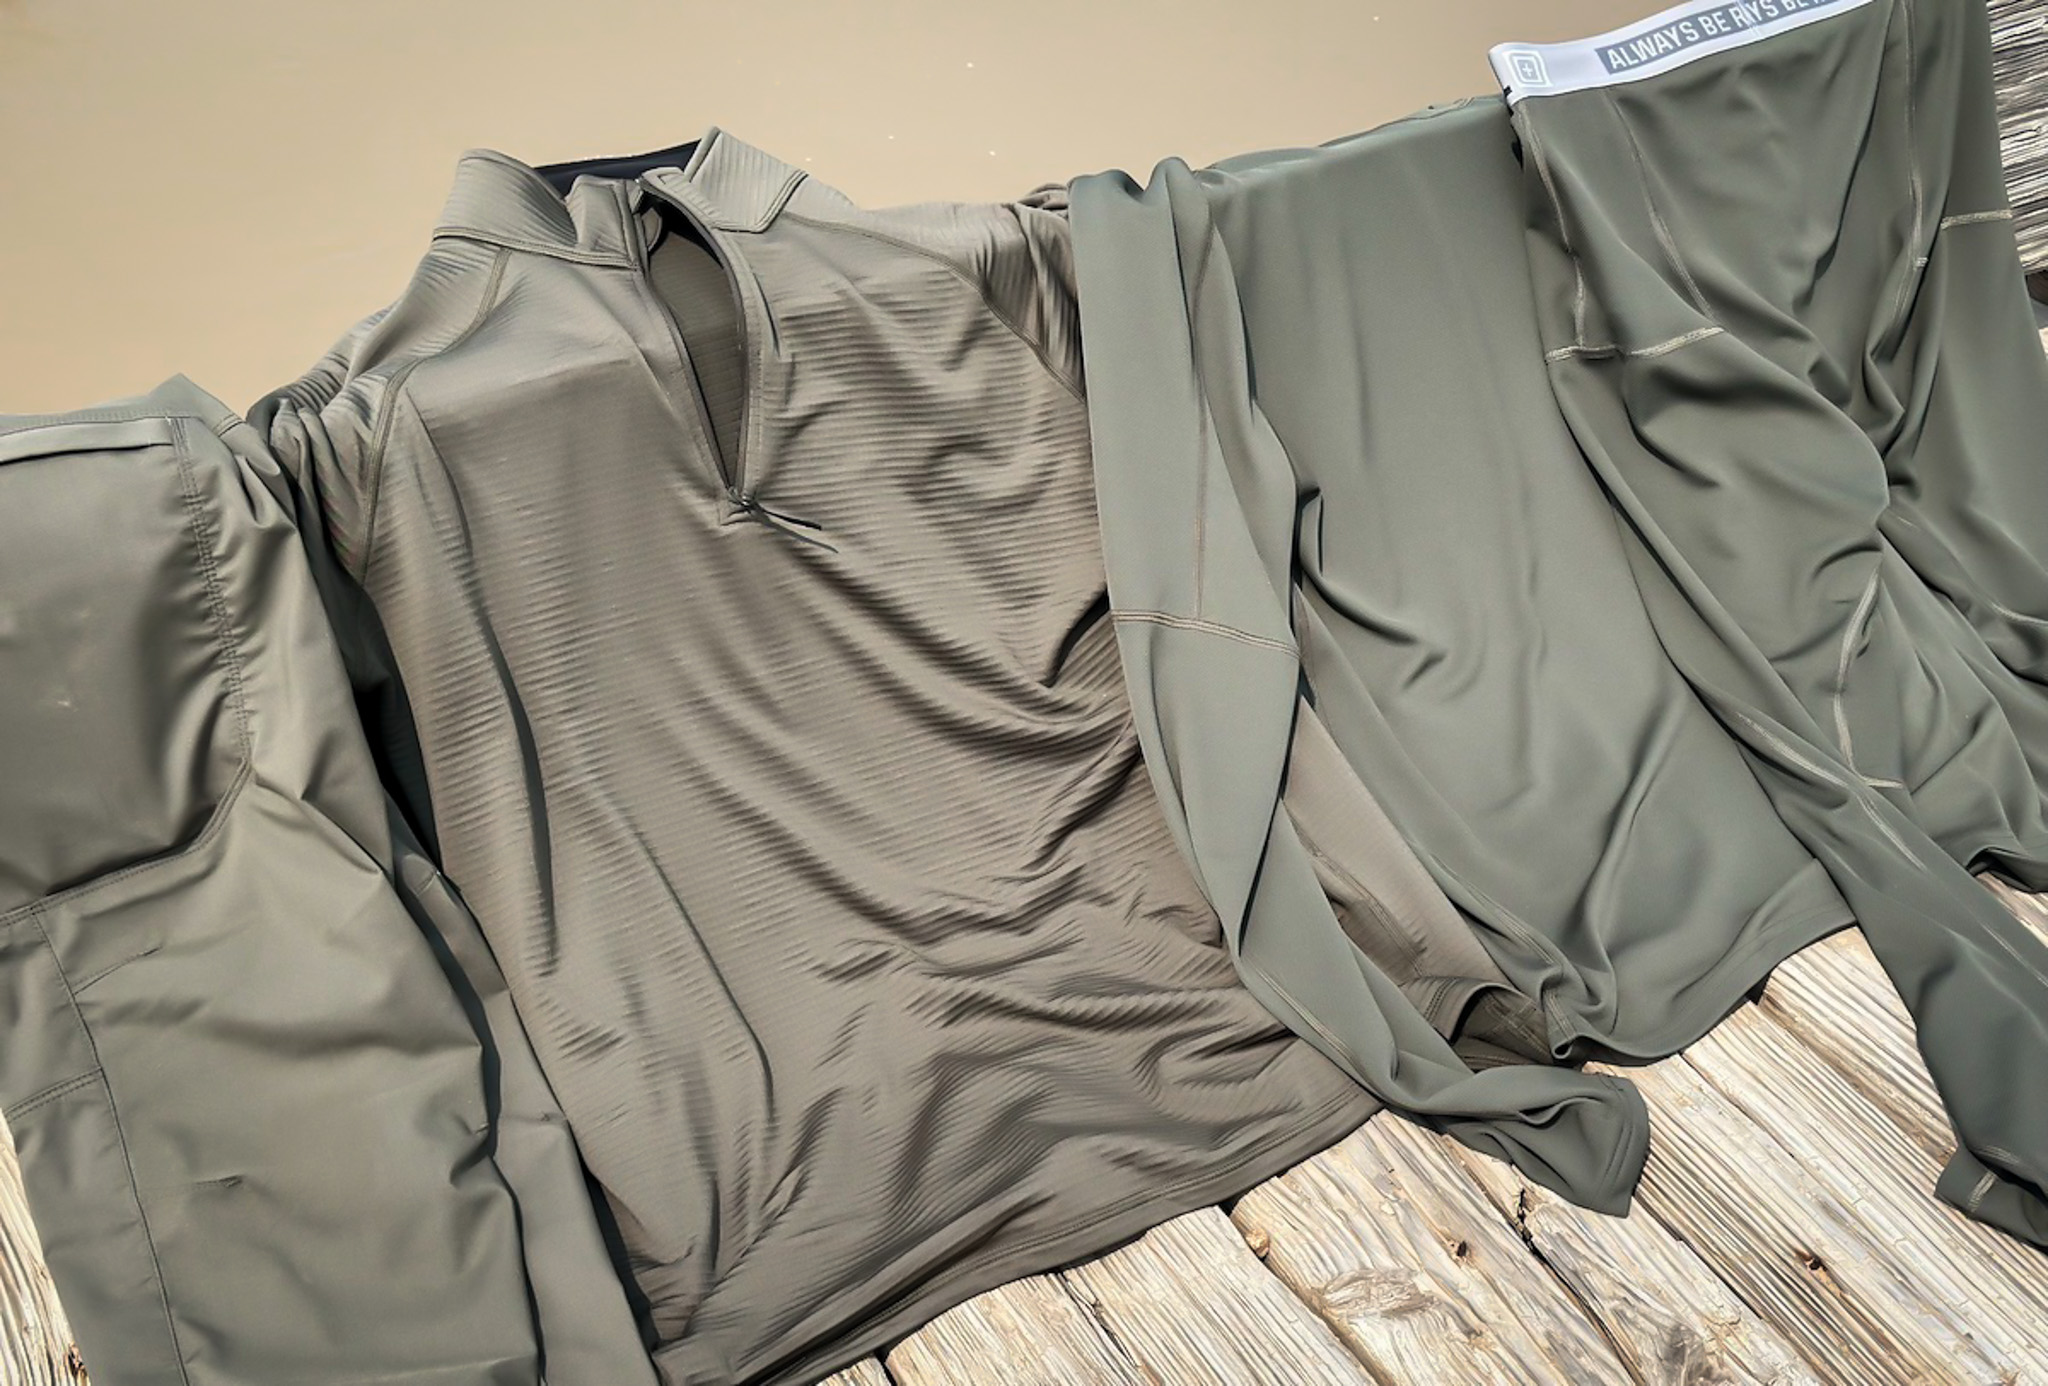 TESTED TRUE: 5.11 Tactical Garb